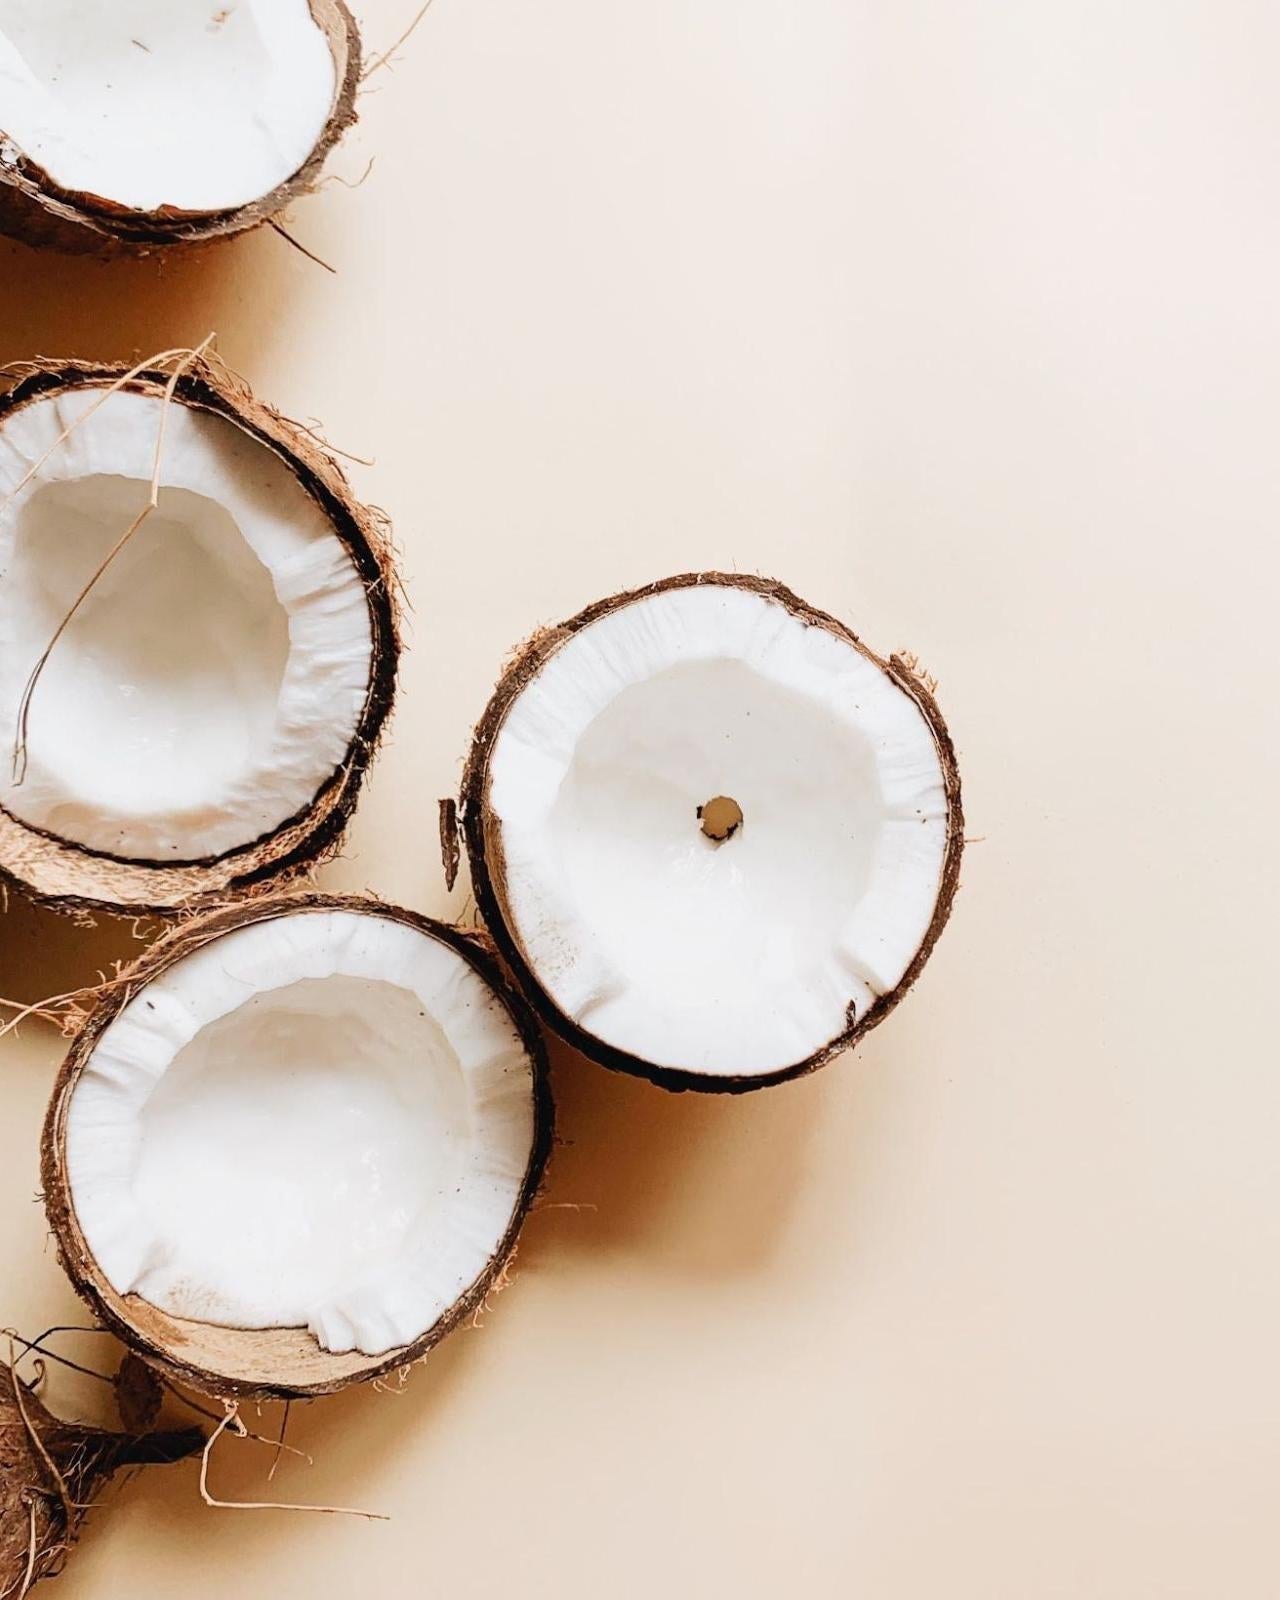 What is Coconut Sugar?